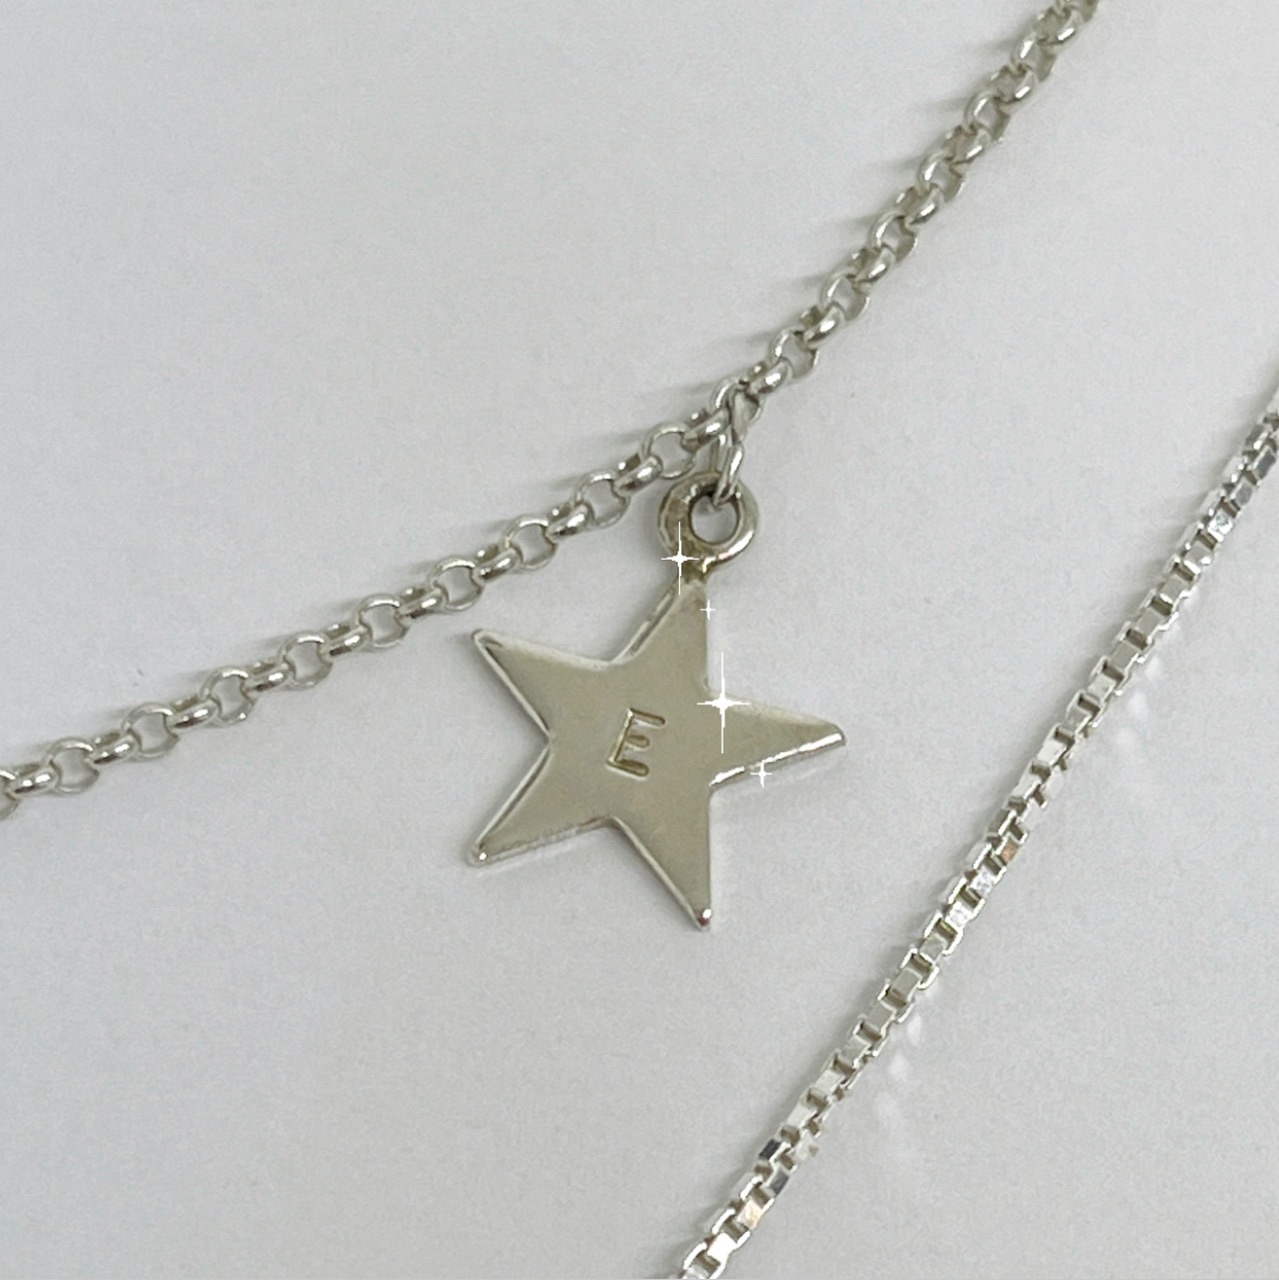 To the stars and back namnhalsband